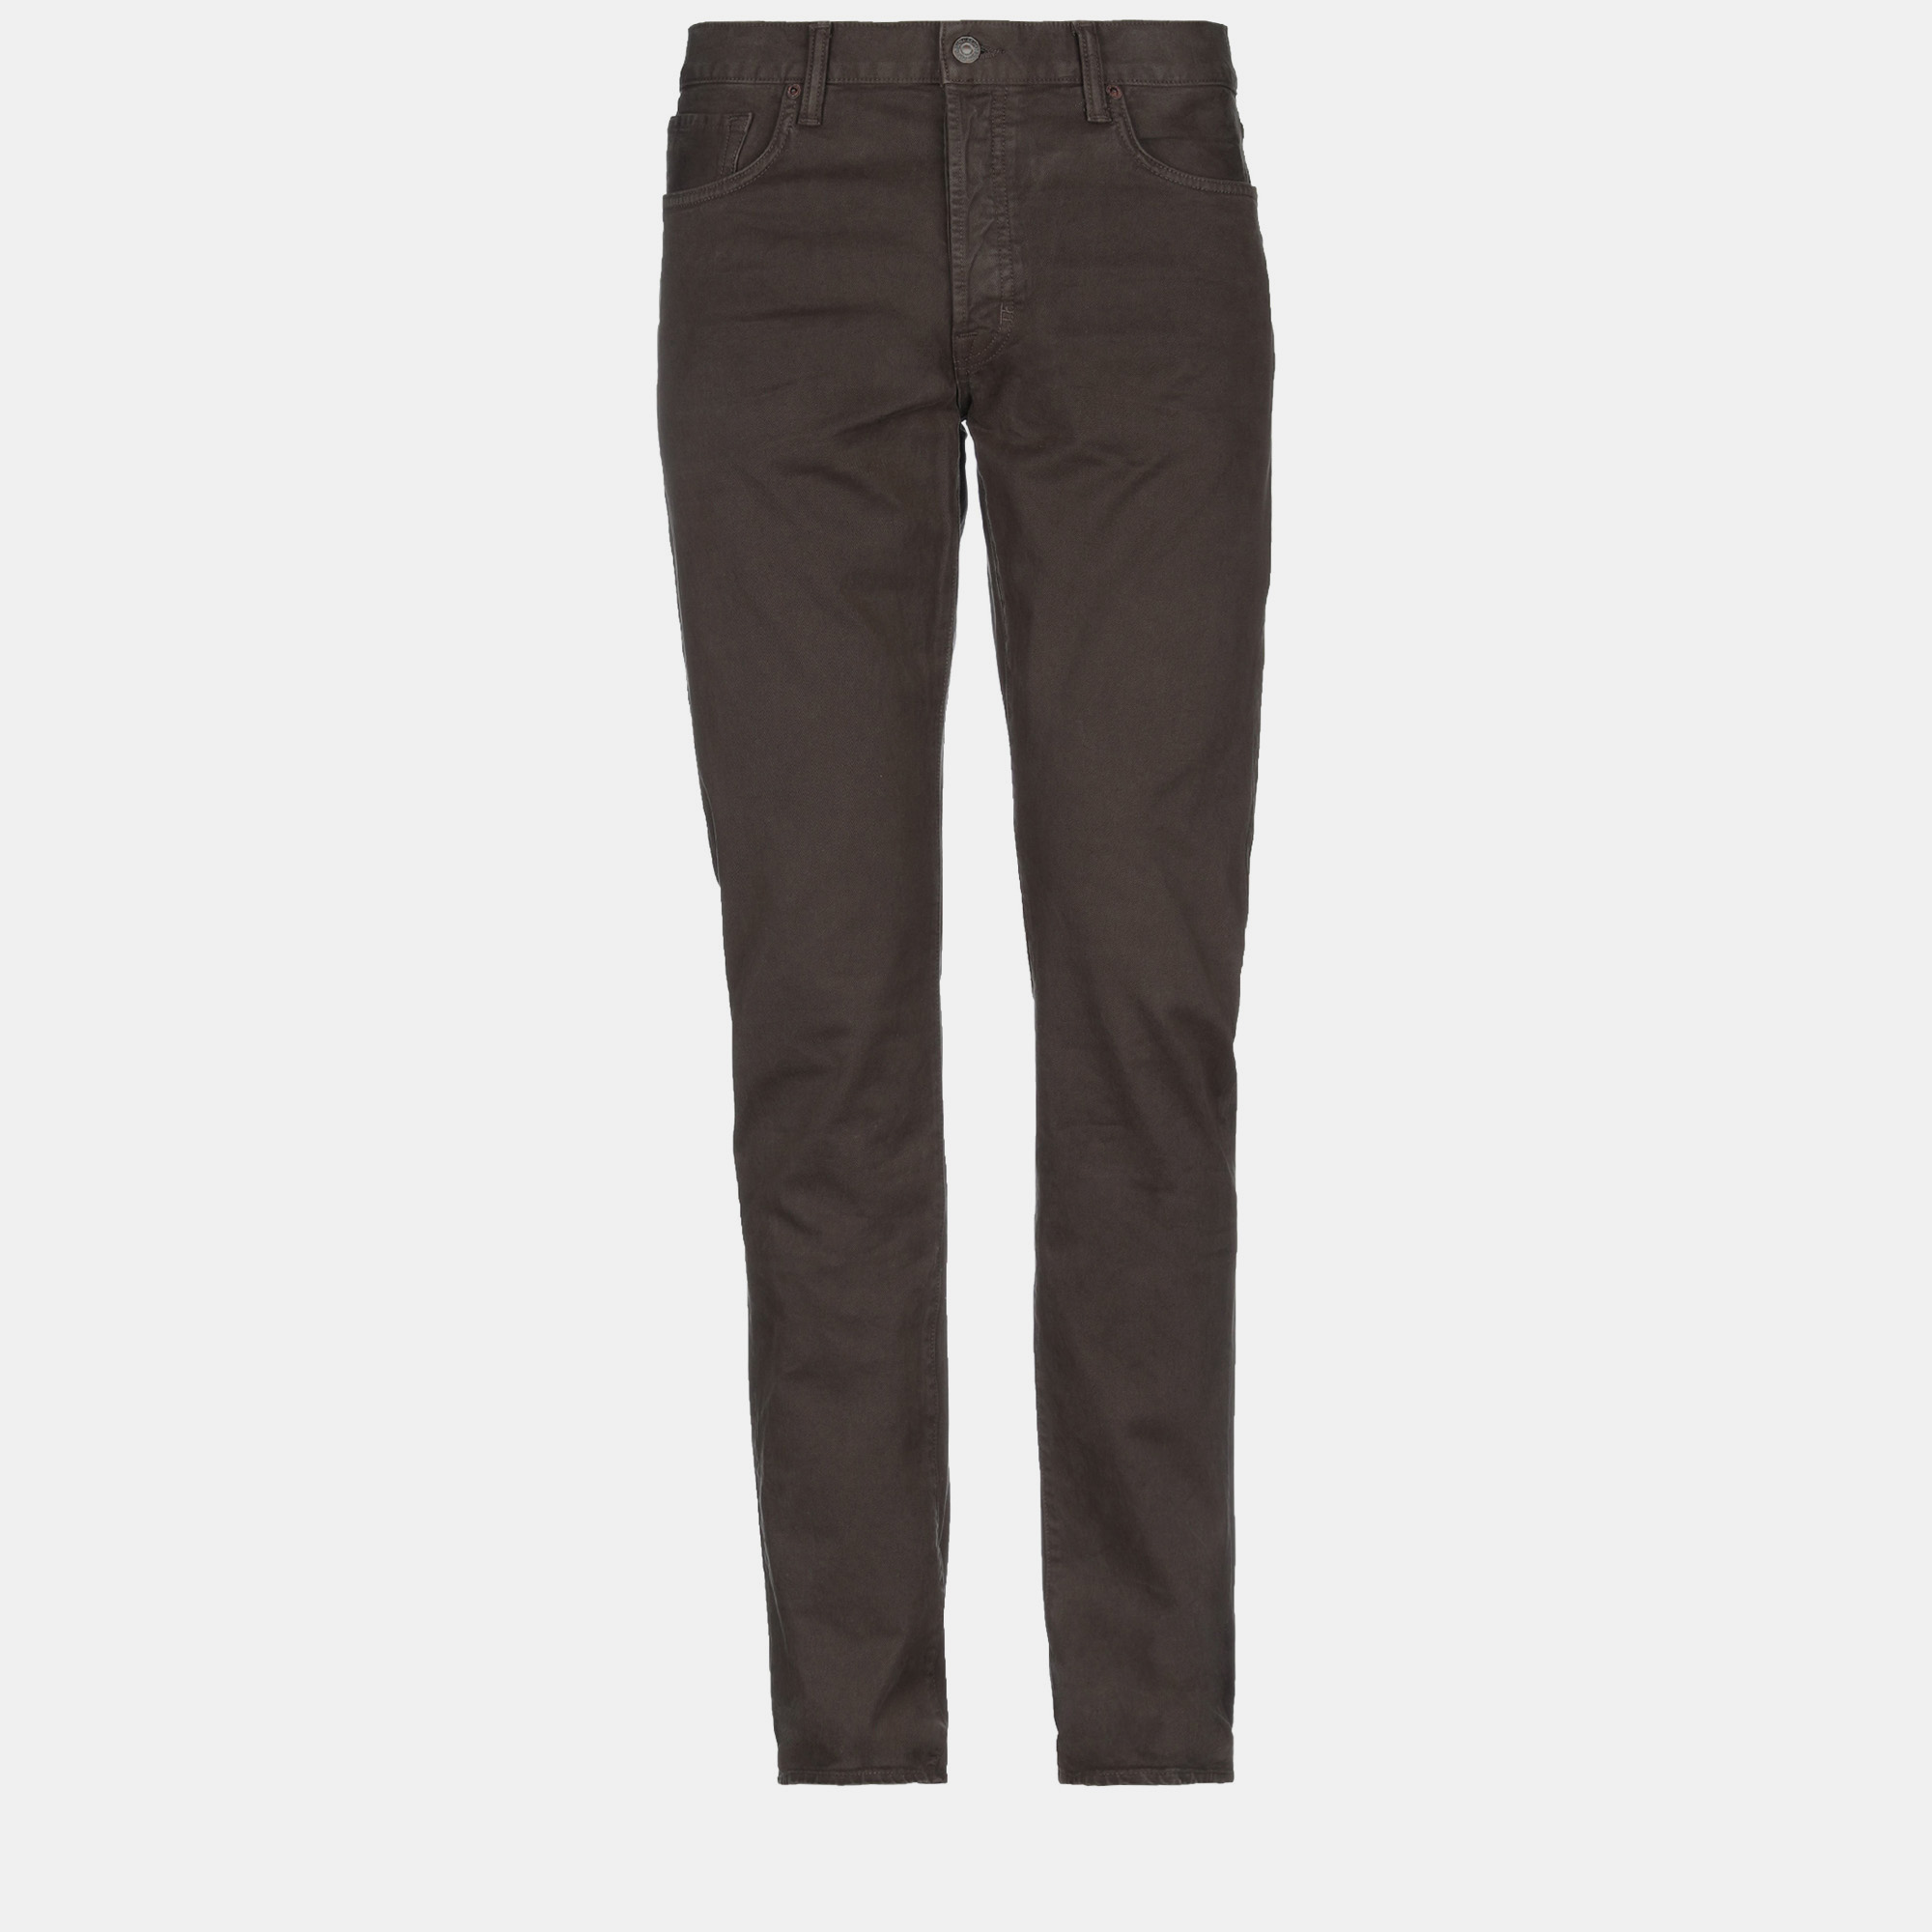 Tom ford cotton pants 36